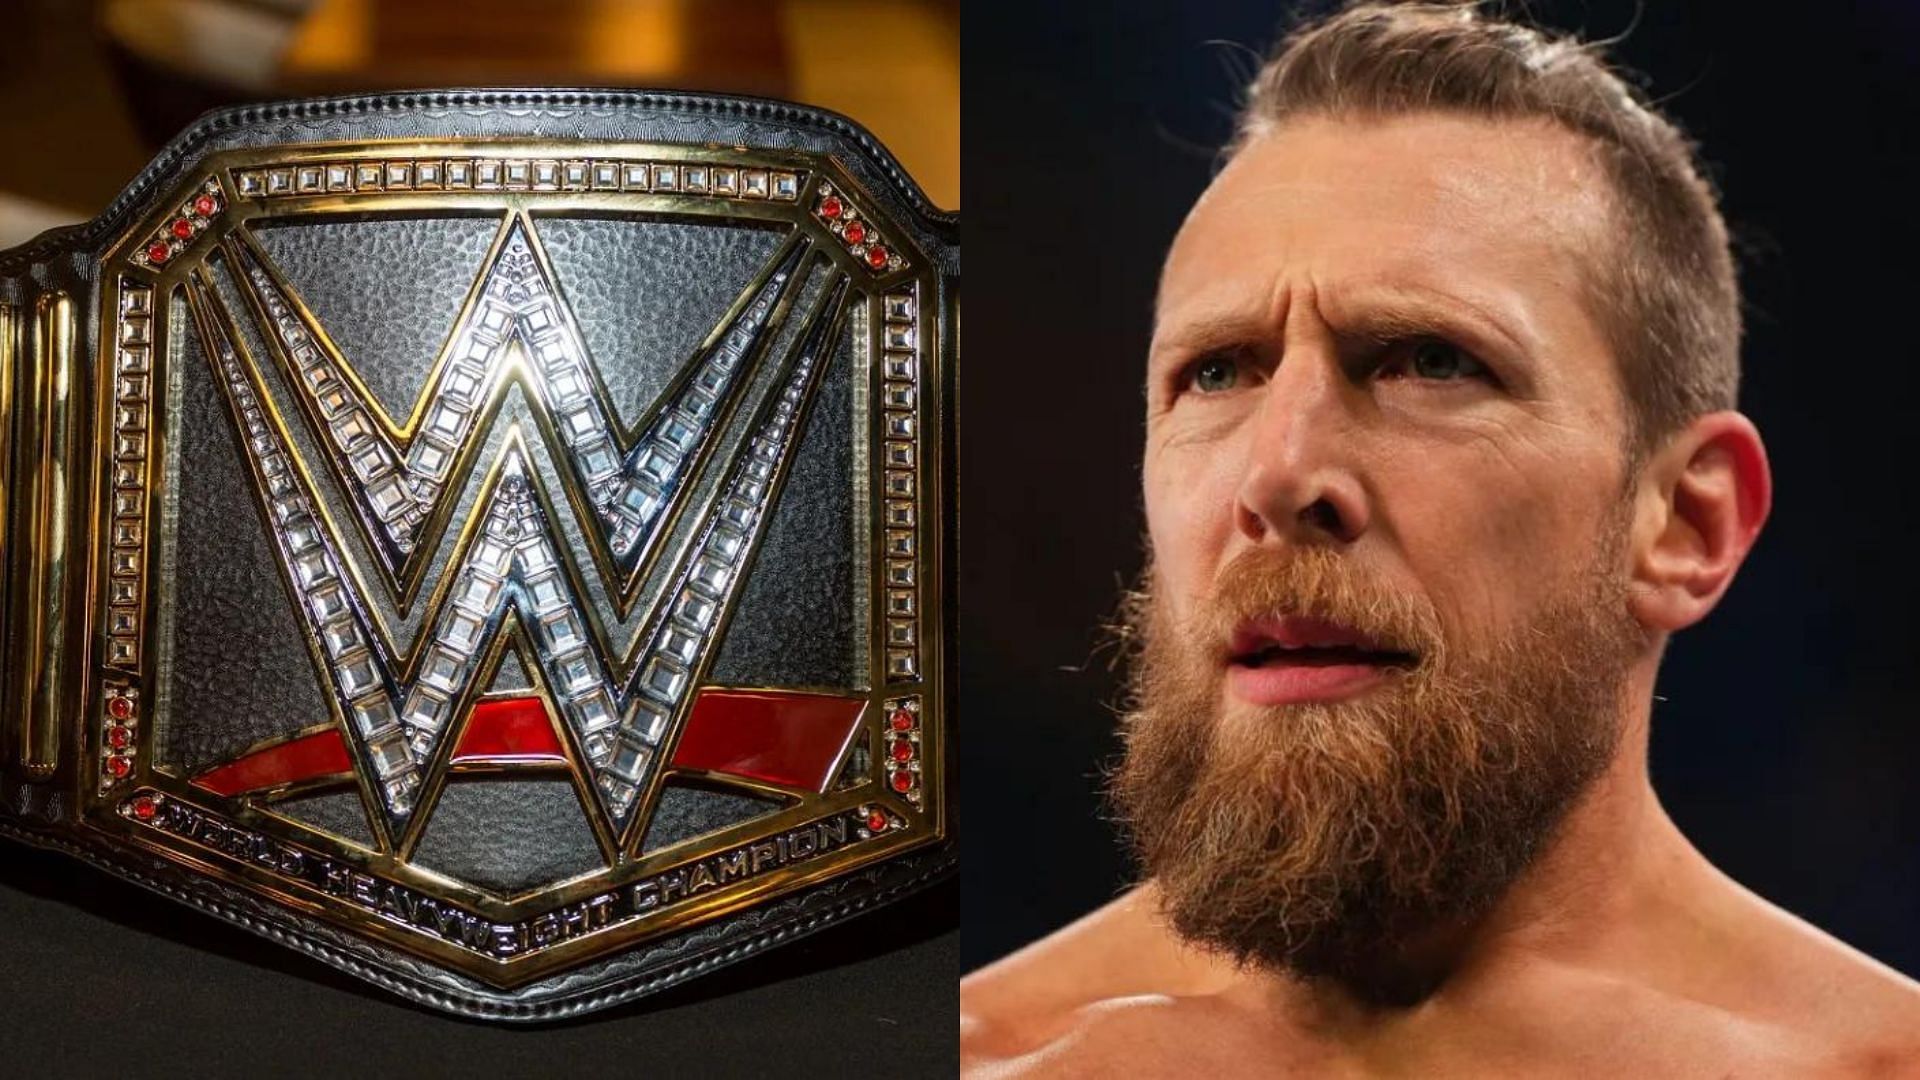 Bryan Danielson is a WWE Grand Slam Champion who is now with AEW